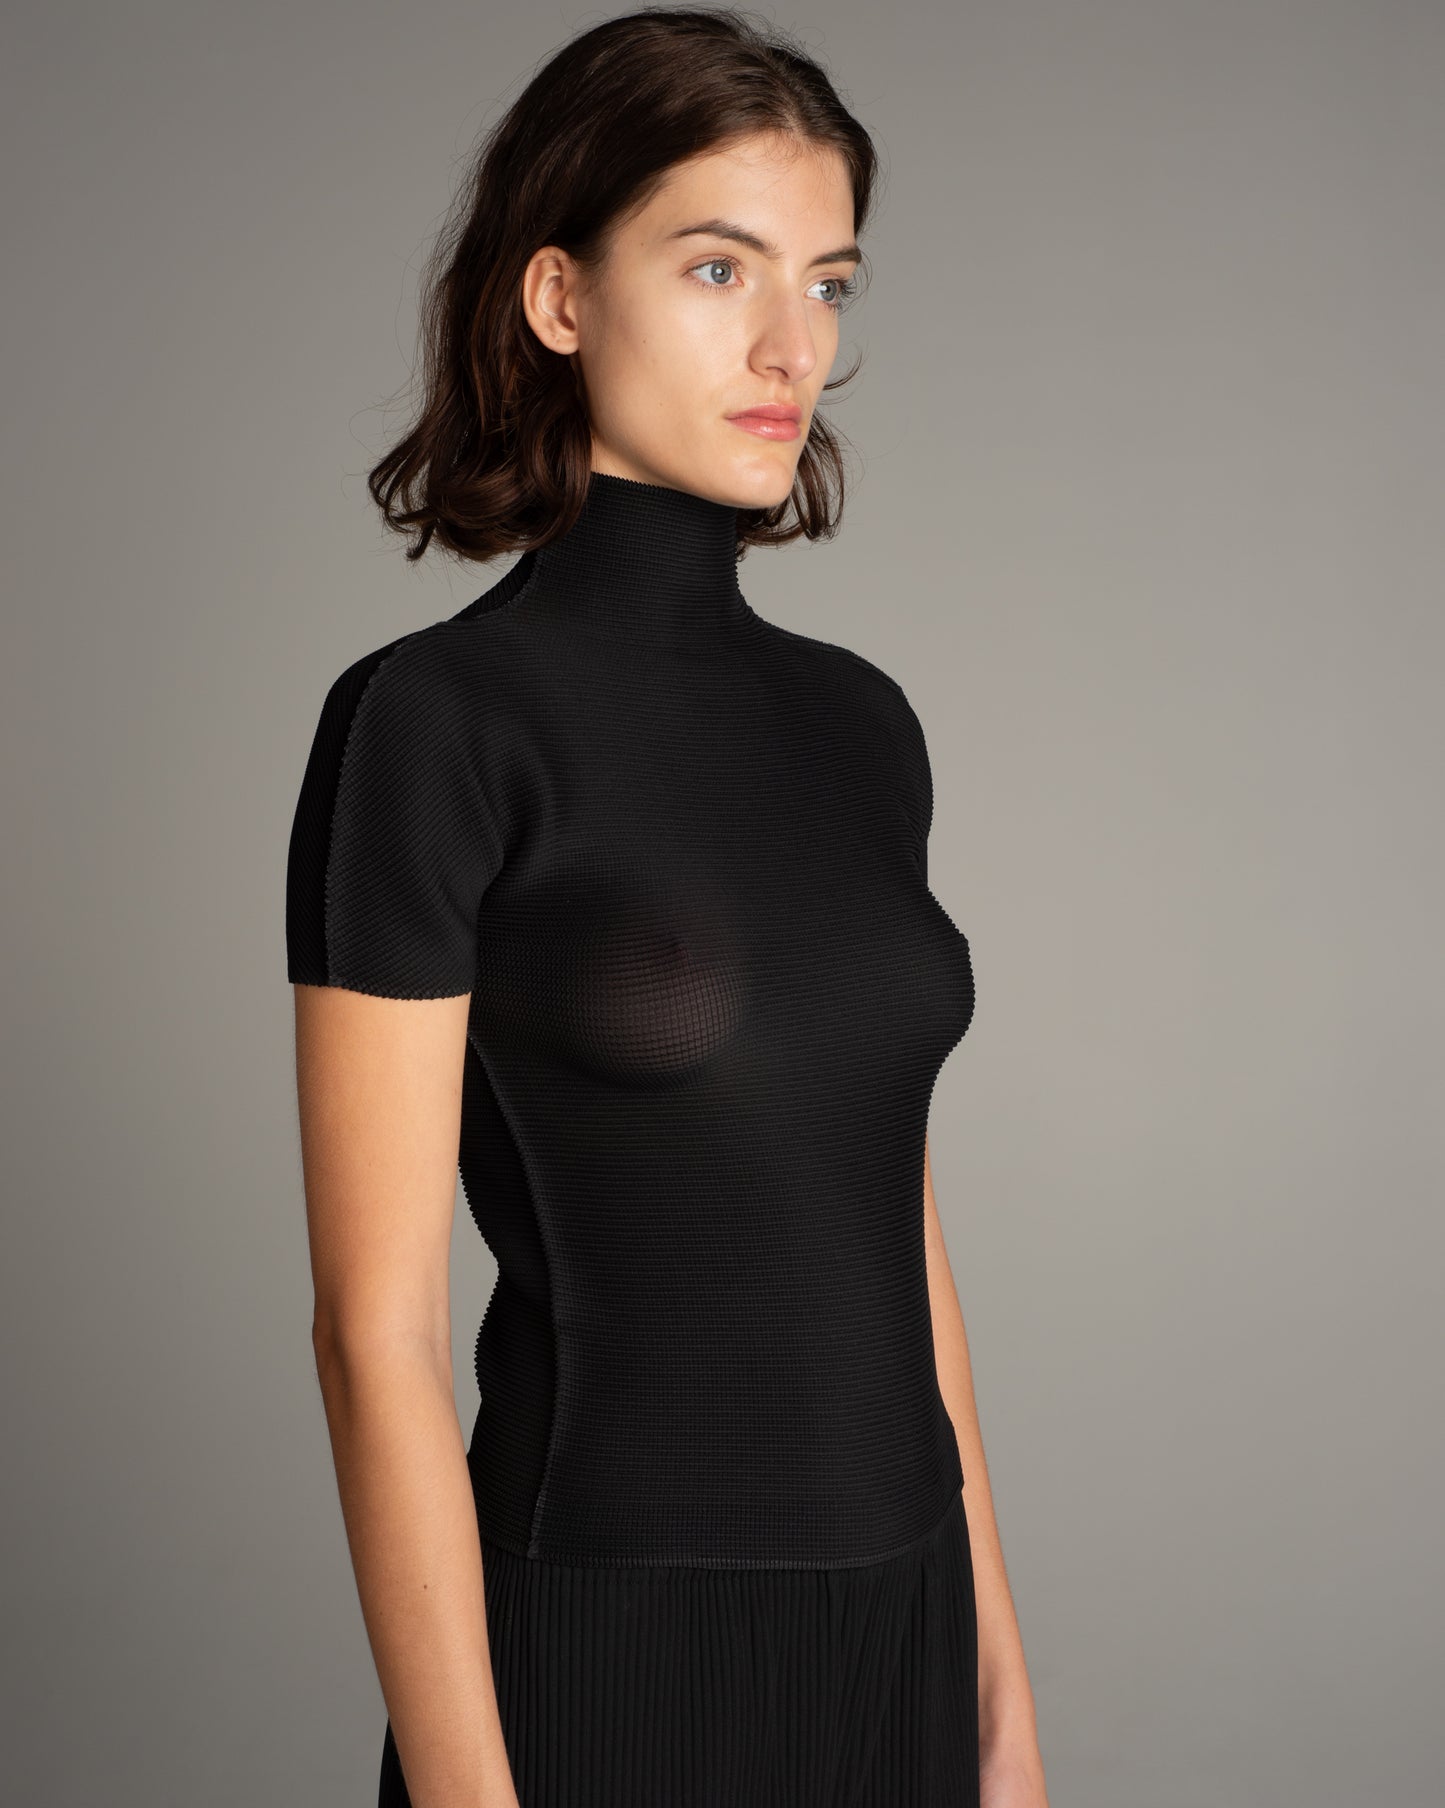 Black Micropleat High Neck Tee